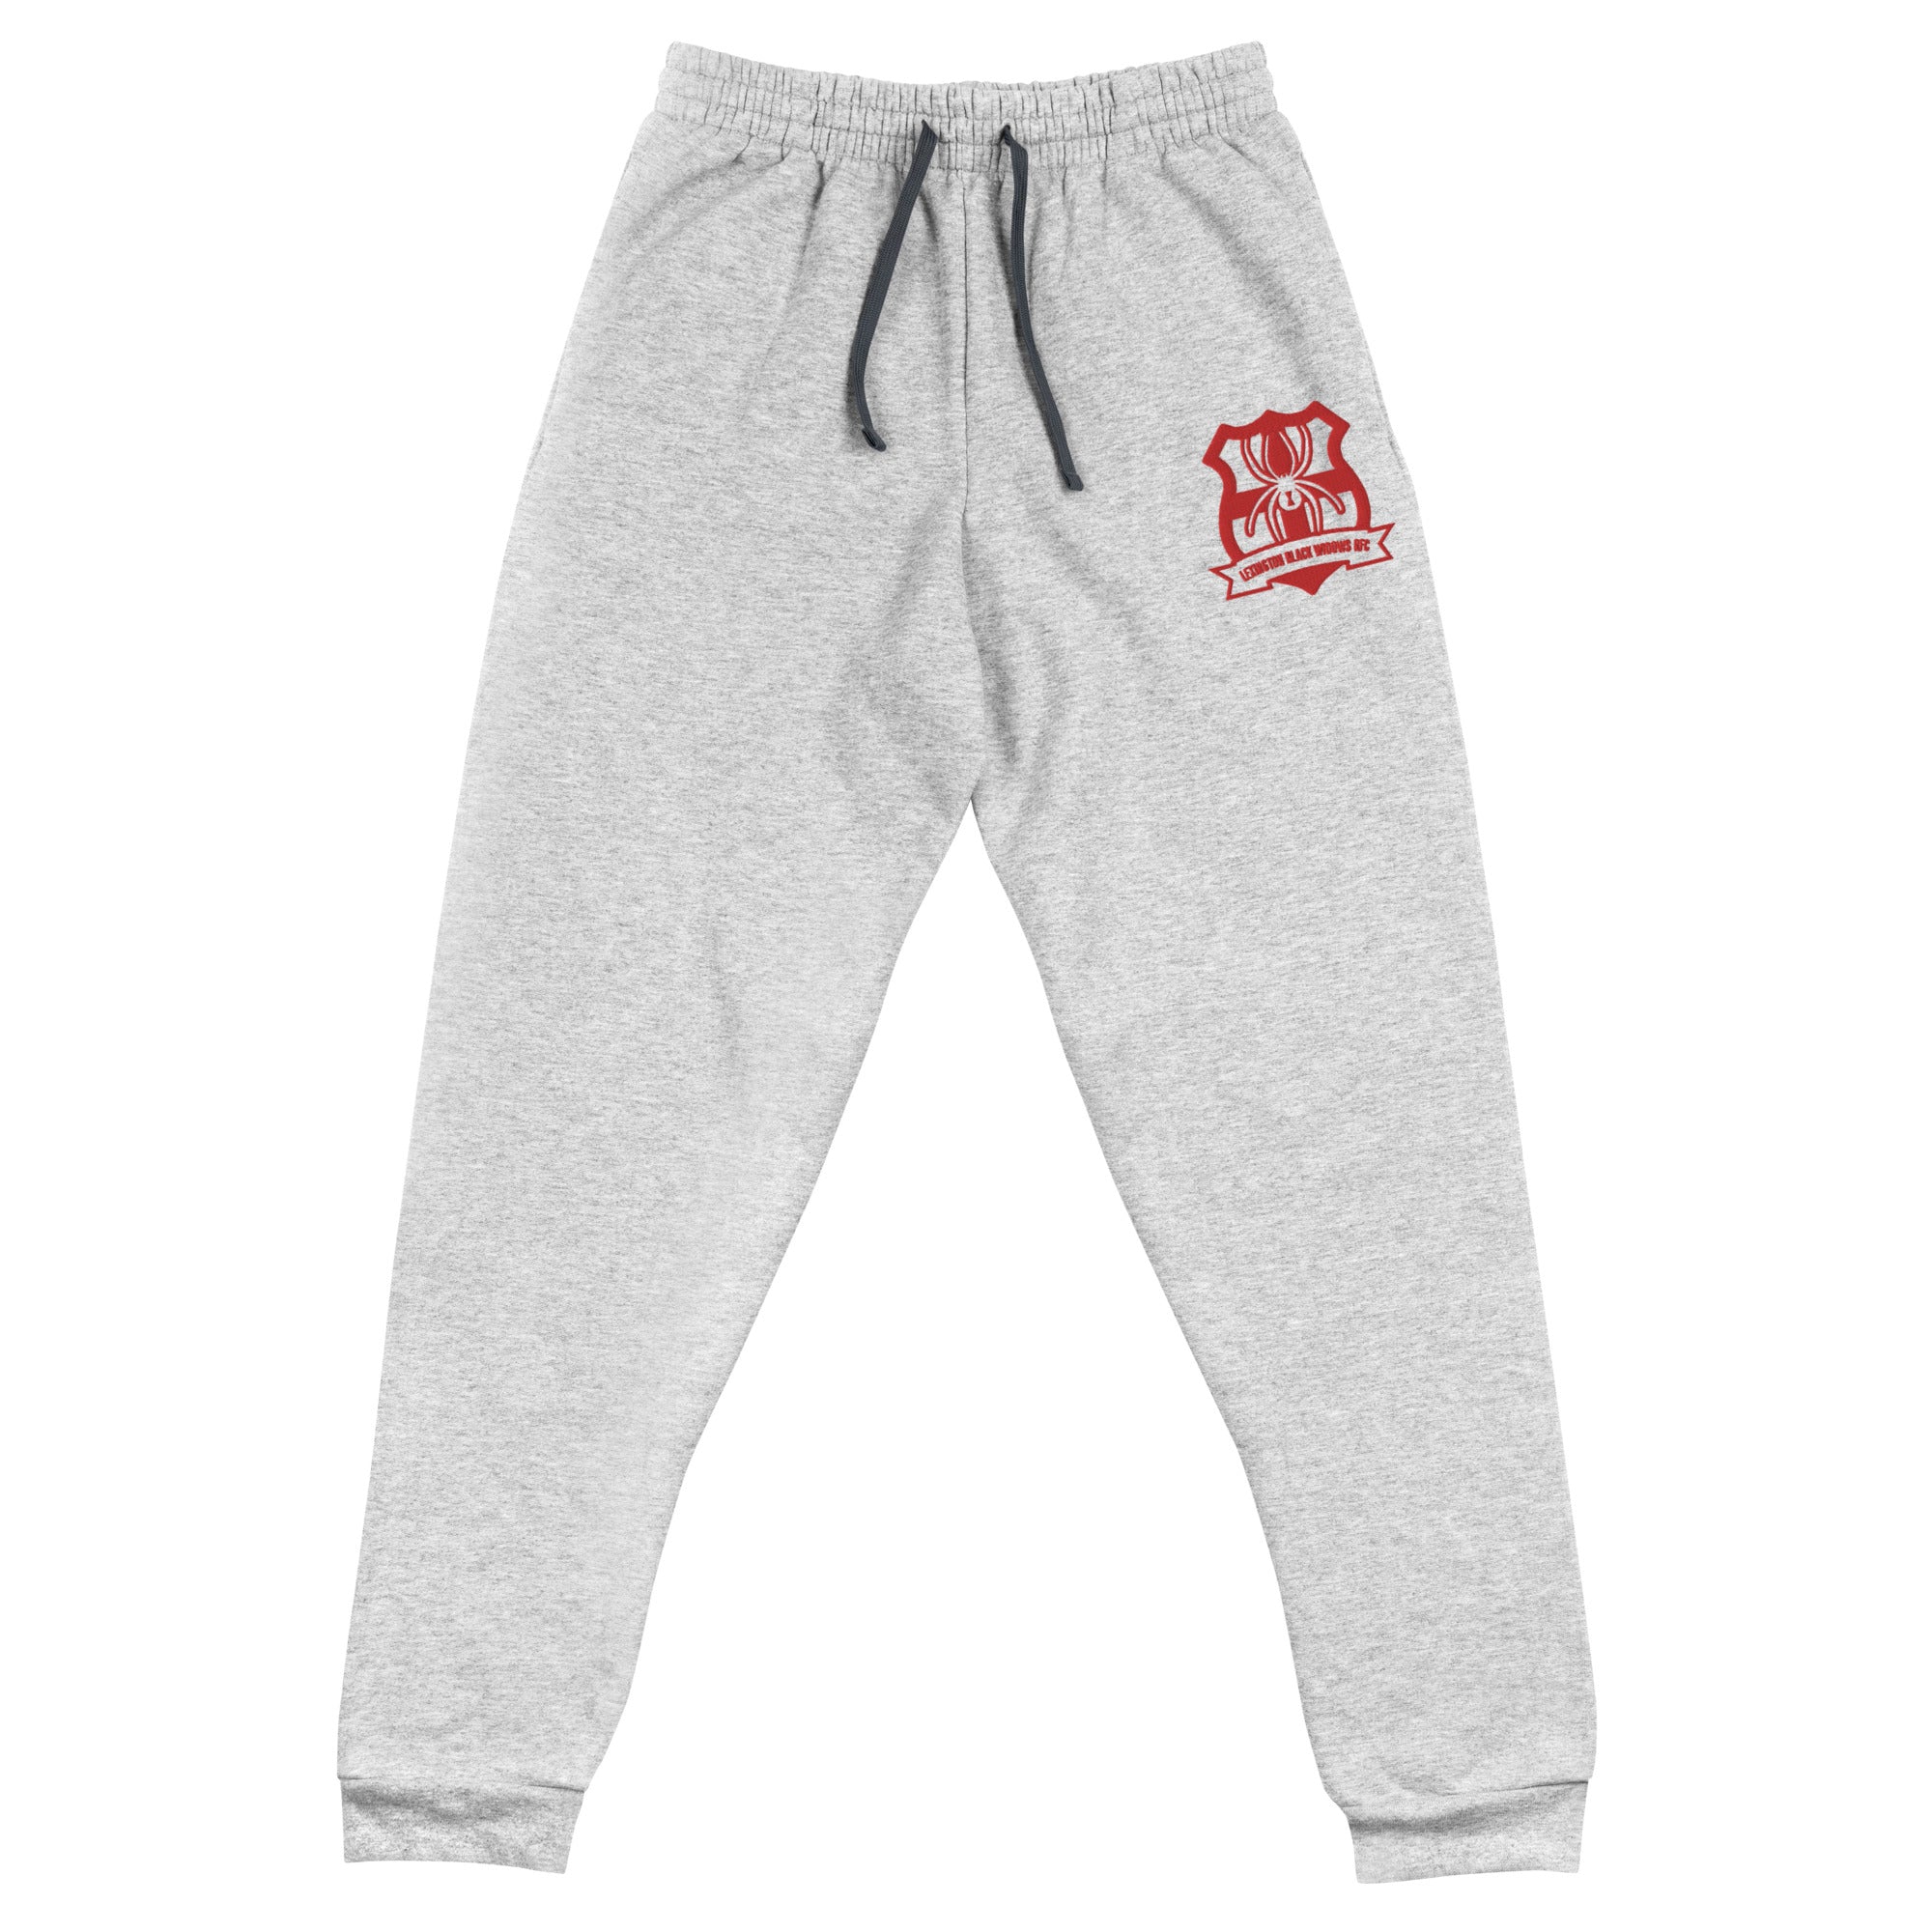 Rugby Imports Black Widows Jogger Sweatpants